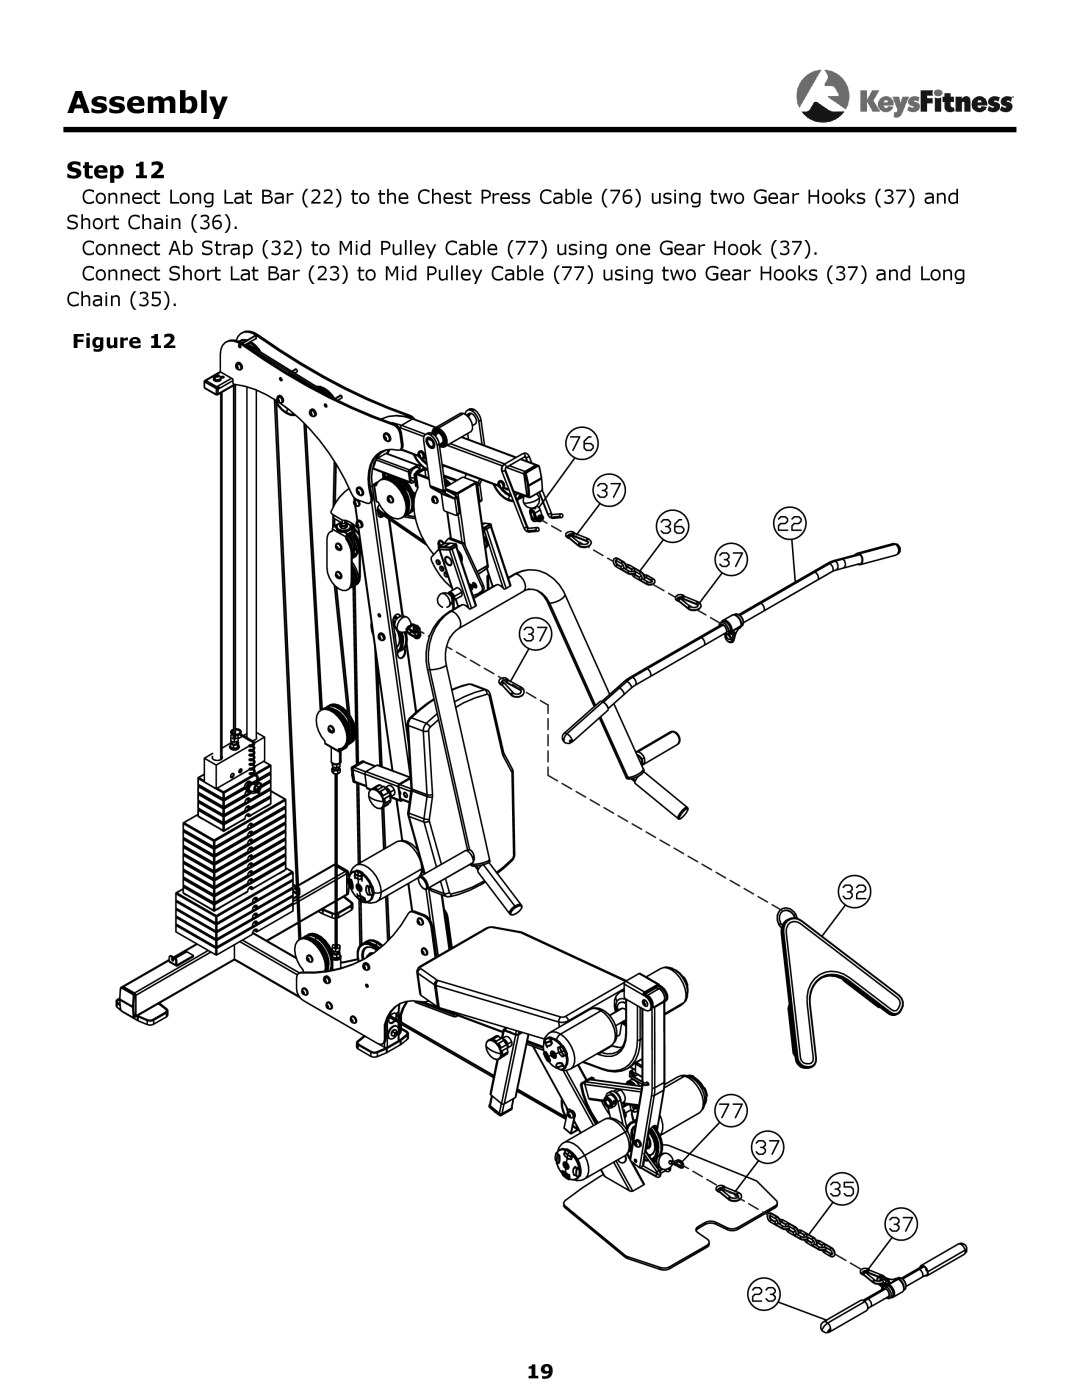 Keys Fitness KF-1560 owner manual Assembly, Step, Connect Ab Strap 32 to Mid Pulley Cable 77 using one Gear Hook 